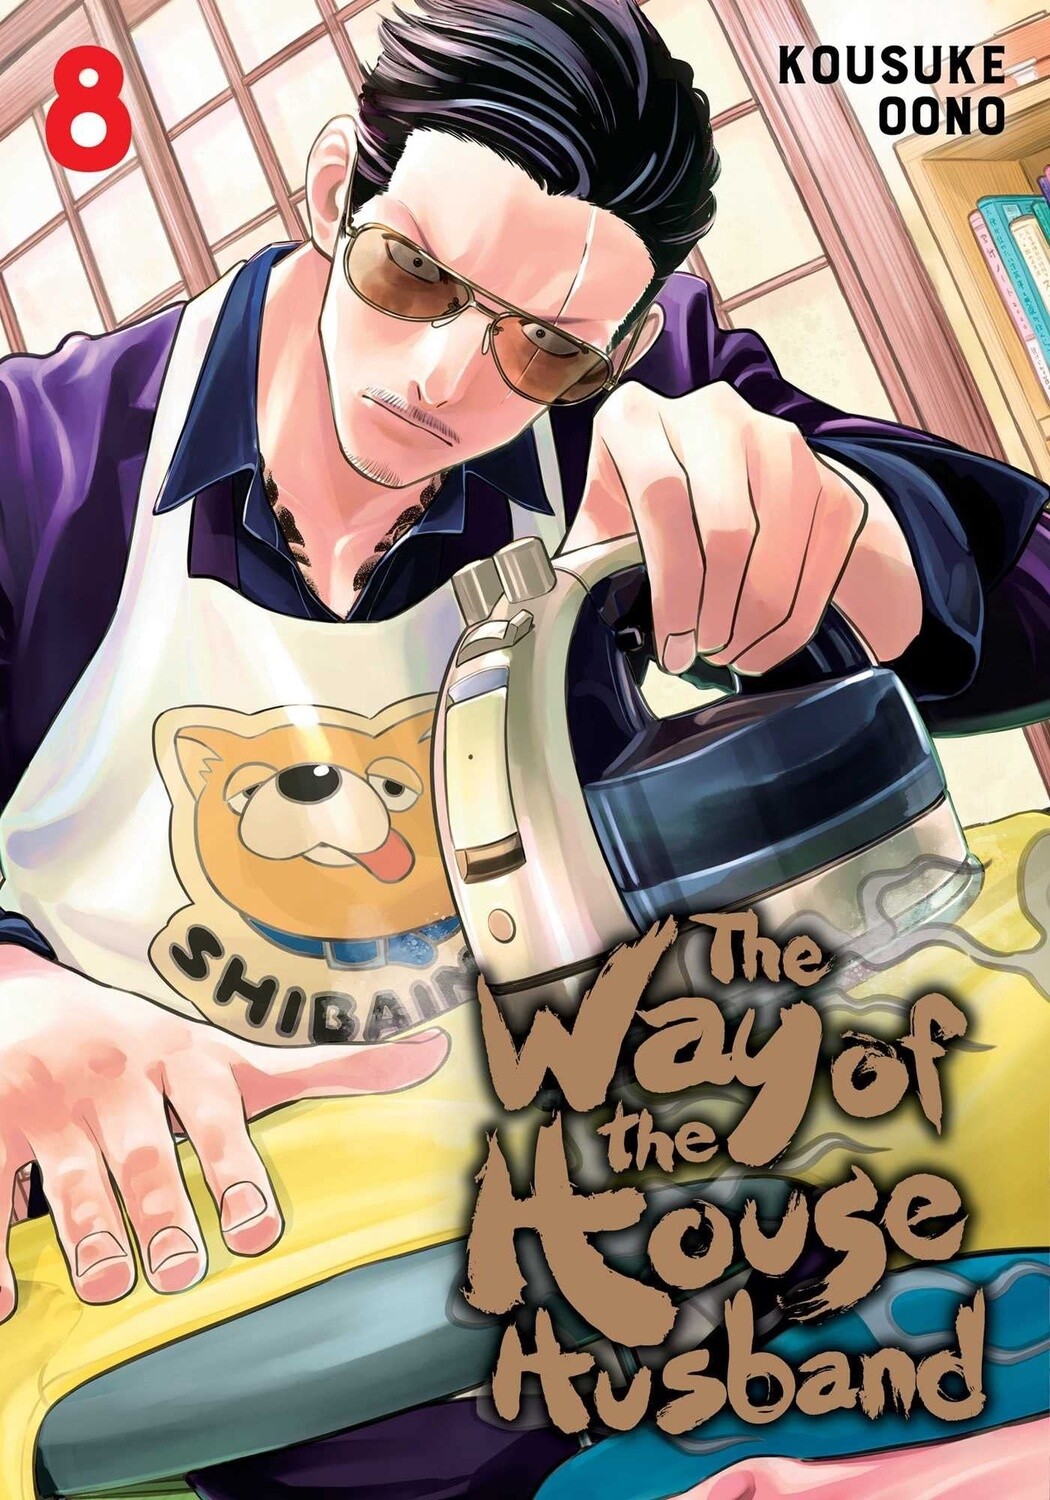 Way of the House Husband Vol. 08